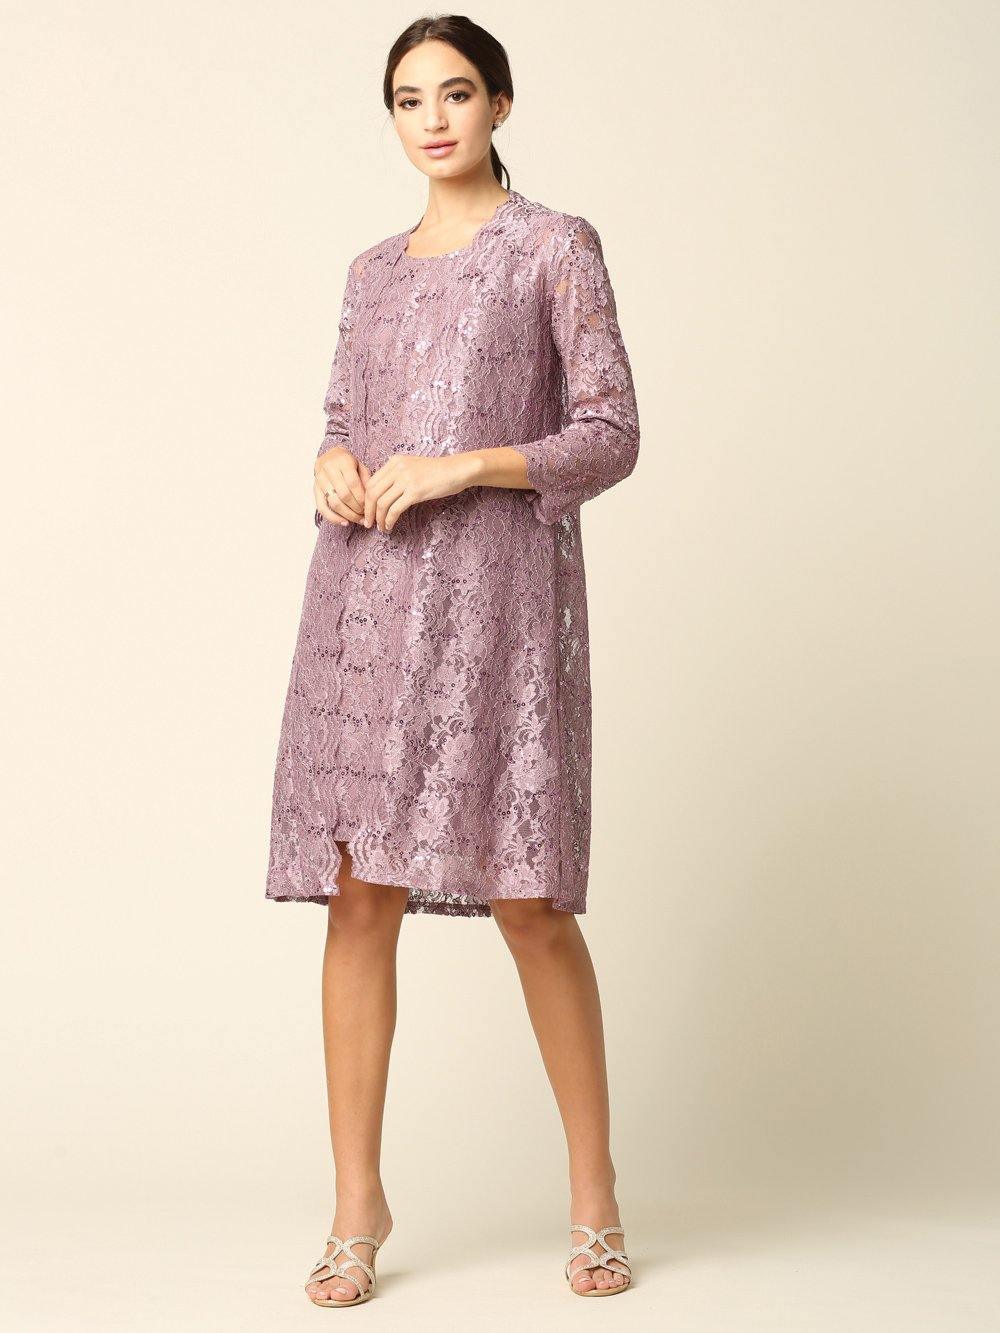 Short Mother of the Bride Lace Jacket Dress Sale - The Dress Outlet